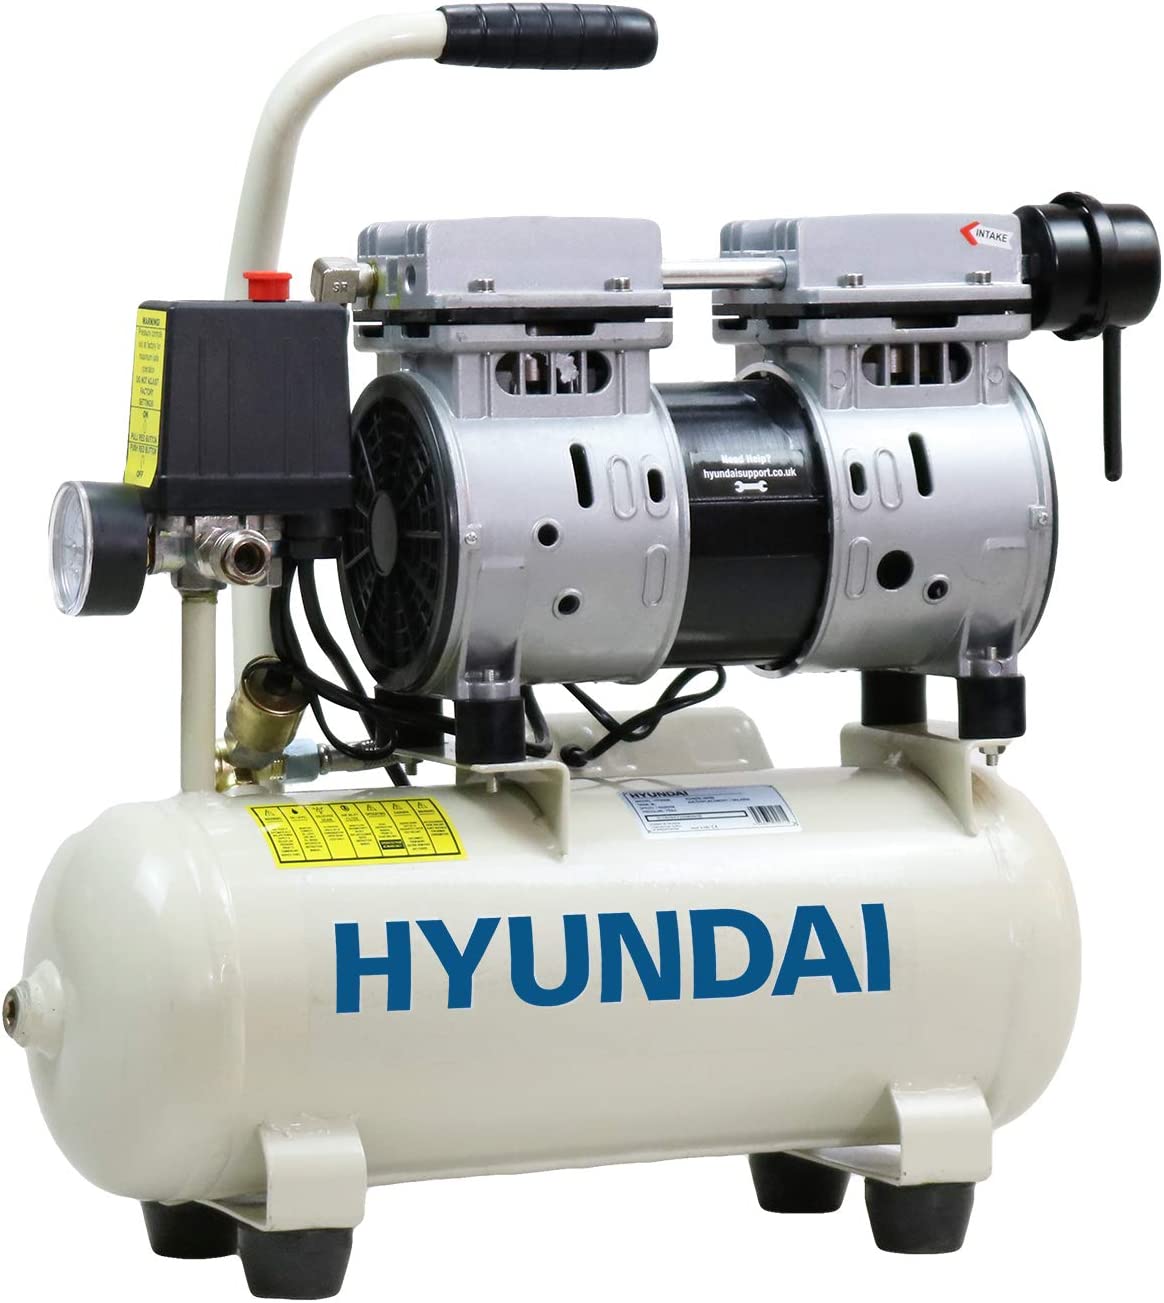 Hyundai 8 Litre Air Compressor, 550W, 4CFM/118psi, Low Noise, Lightweight, Oil Free, Direct Drive, Quick Release Air Connections 